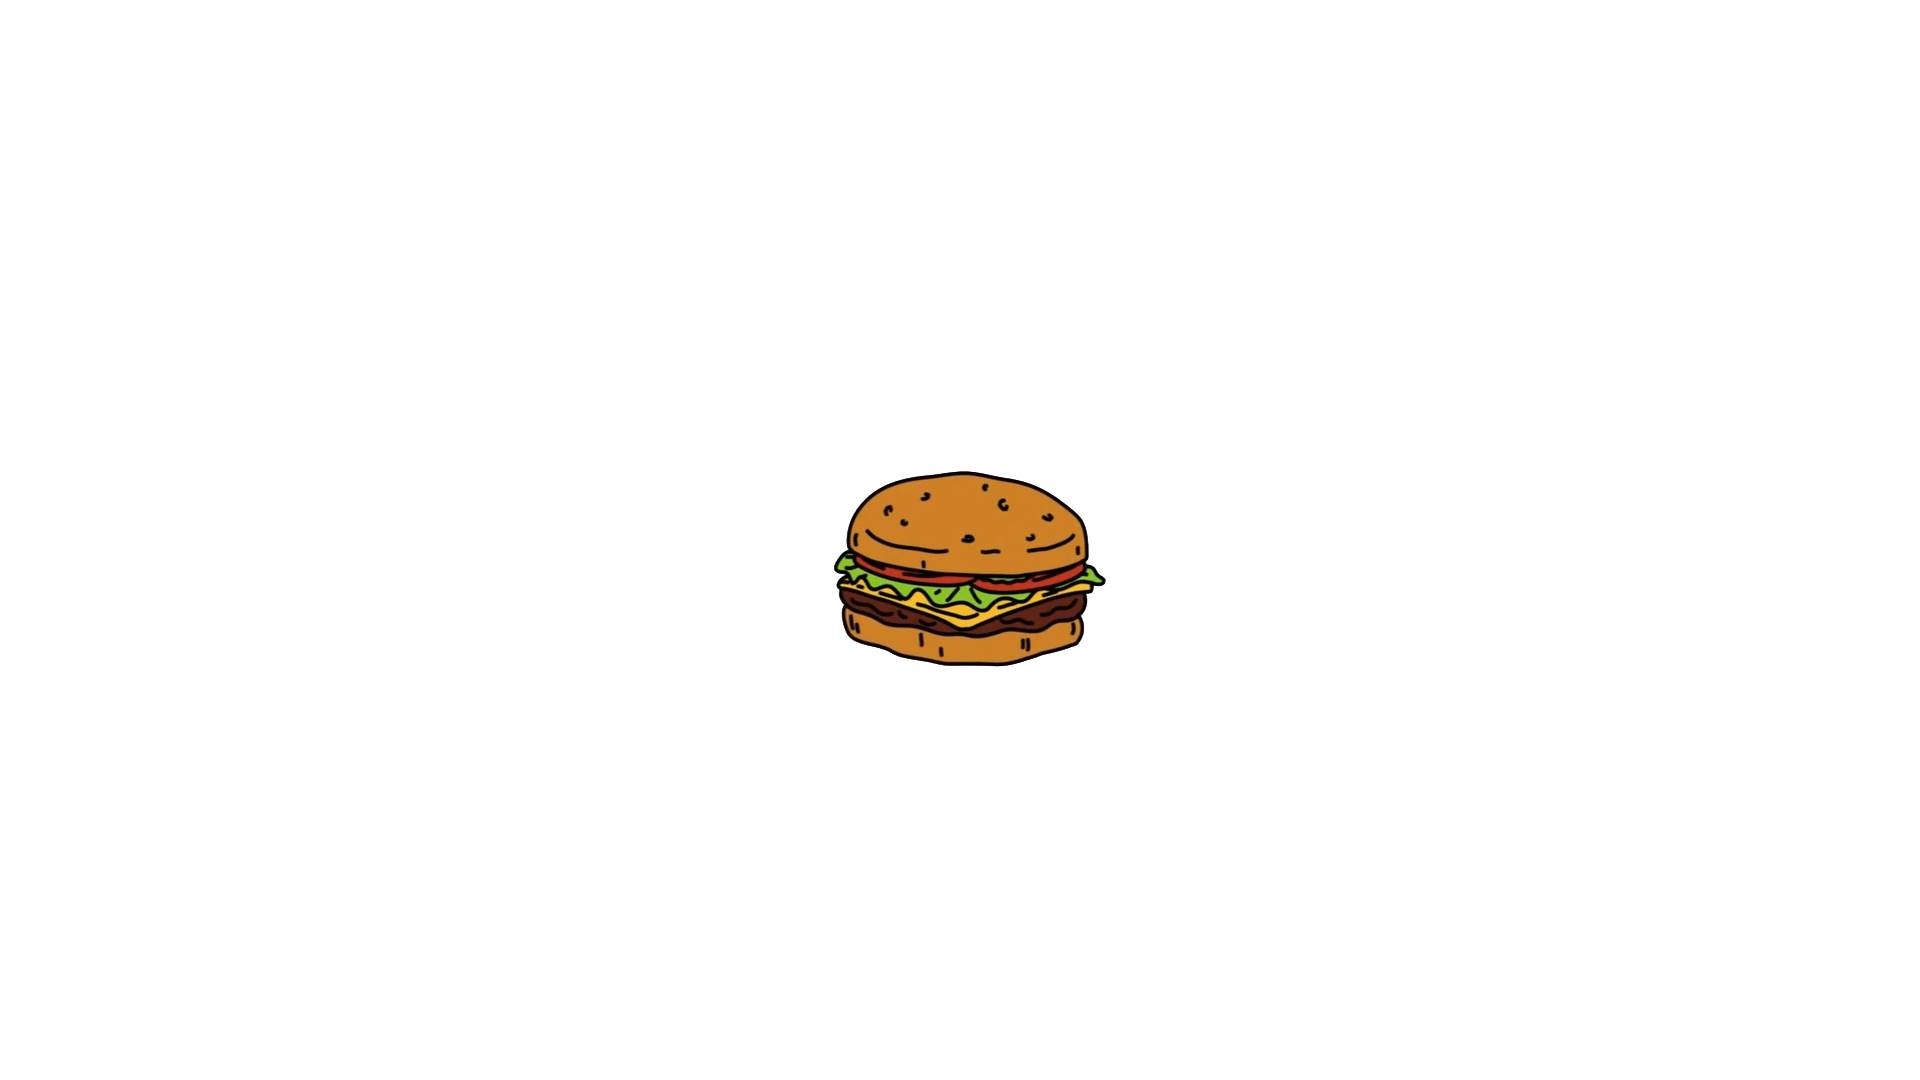 Bob's Burgers Wallpaper. by MIGRANE0Aug 15 2015. Load 26 more images Grid  view